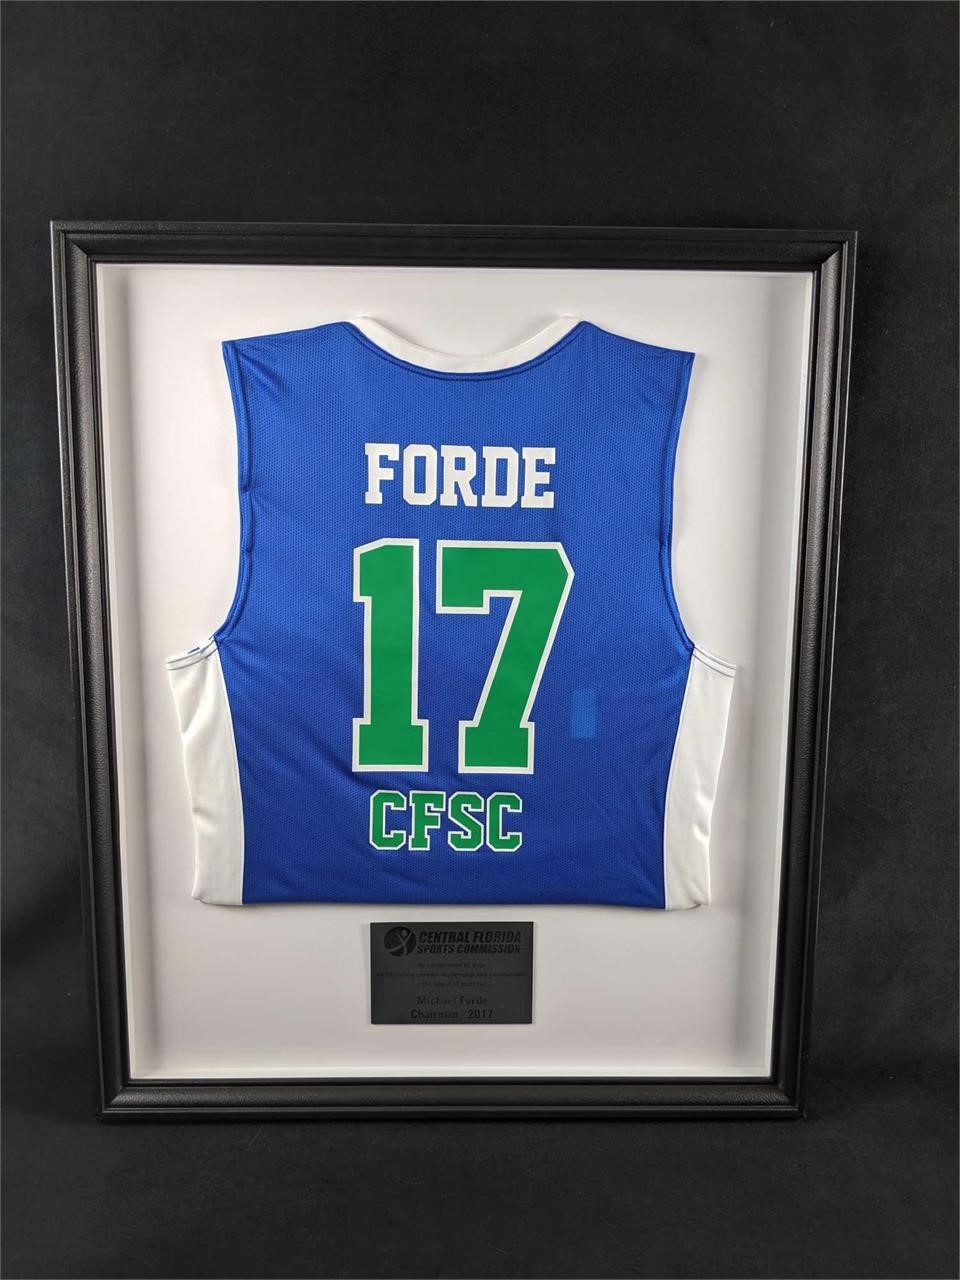 Framed Central Florida Sports Commission Service A